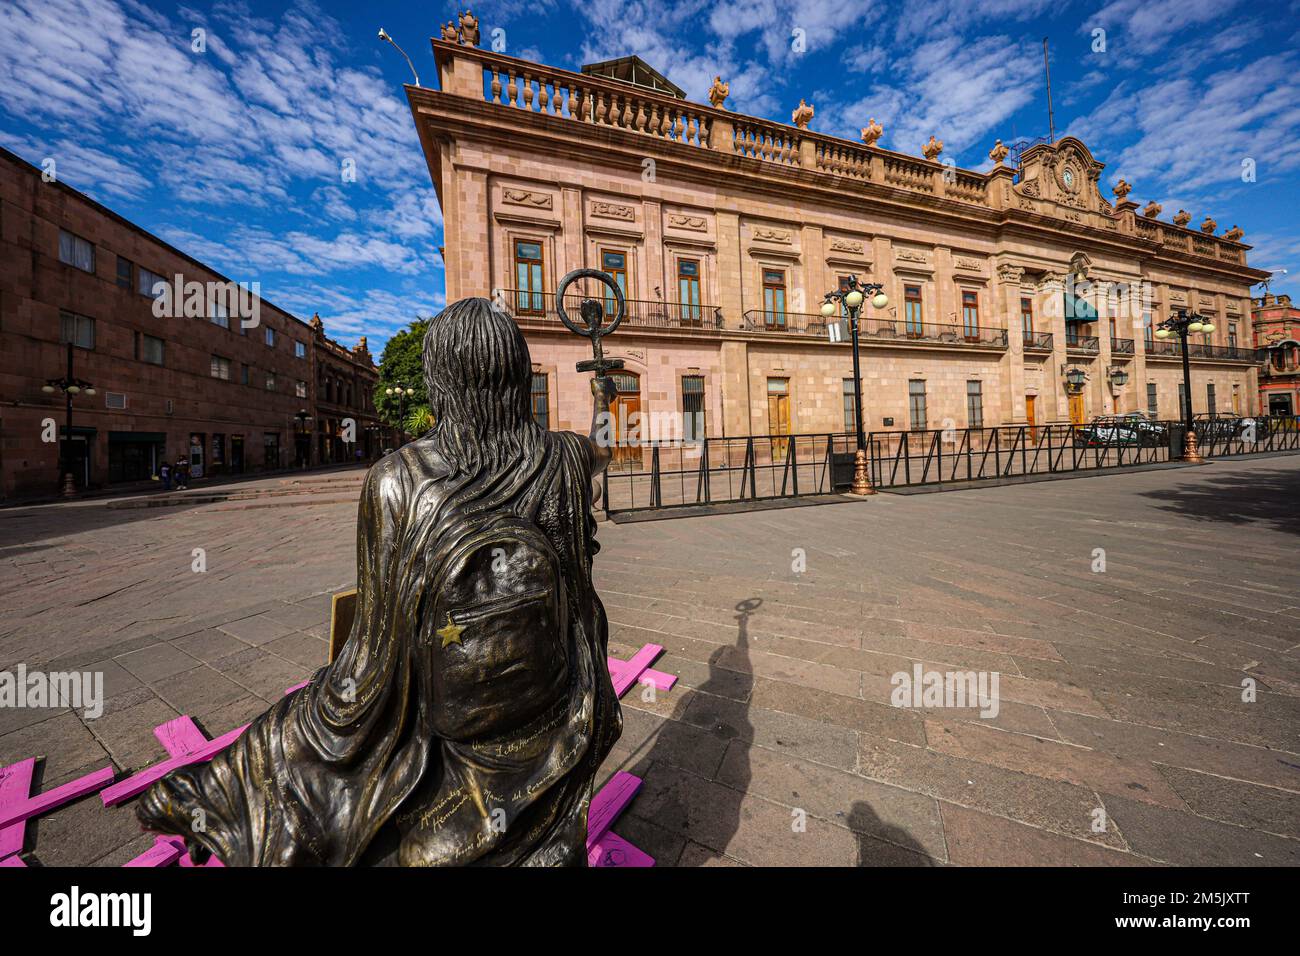 Statue of a woman and the symbol of the feminist movement, lgbt in the square in front of the government palace of San Luis Potosí Mexico. femenicide. San Luis Potosí, It was an important gold and silver mining center on the Camino Real de Tierra Adentro, a commercial route from the mid-16th century to the 19th century colonial buildings, such as the imposing Baroque-era Temple of San Francisco, which dominates the leafy Garden of San Francisco. Nearby is the Templo del Carmen, dating from the 18th century.  (photo By Luis GutierrezNortePhoto)    Estatua de mujer y el simbolo del movimiento f Stock Photo